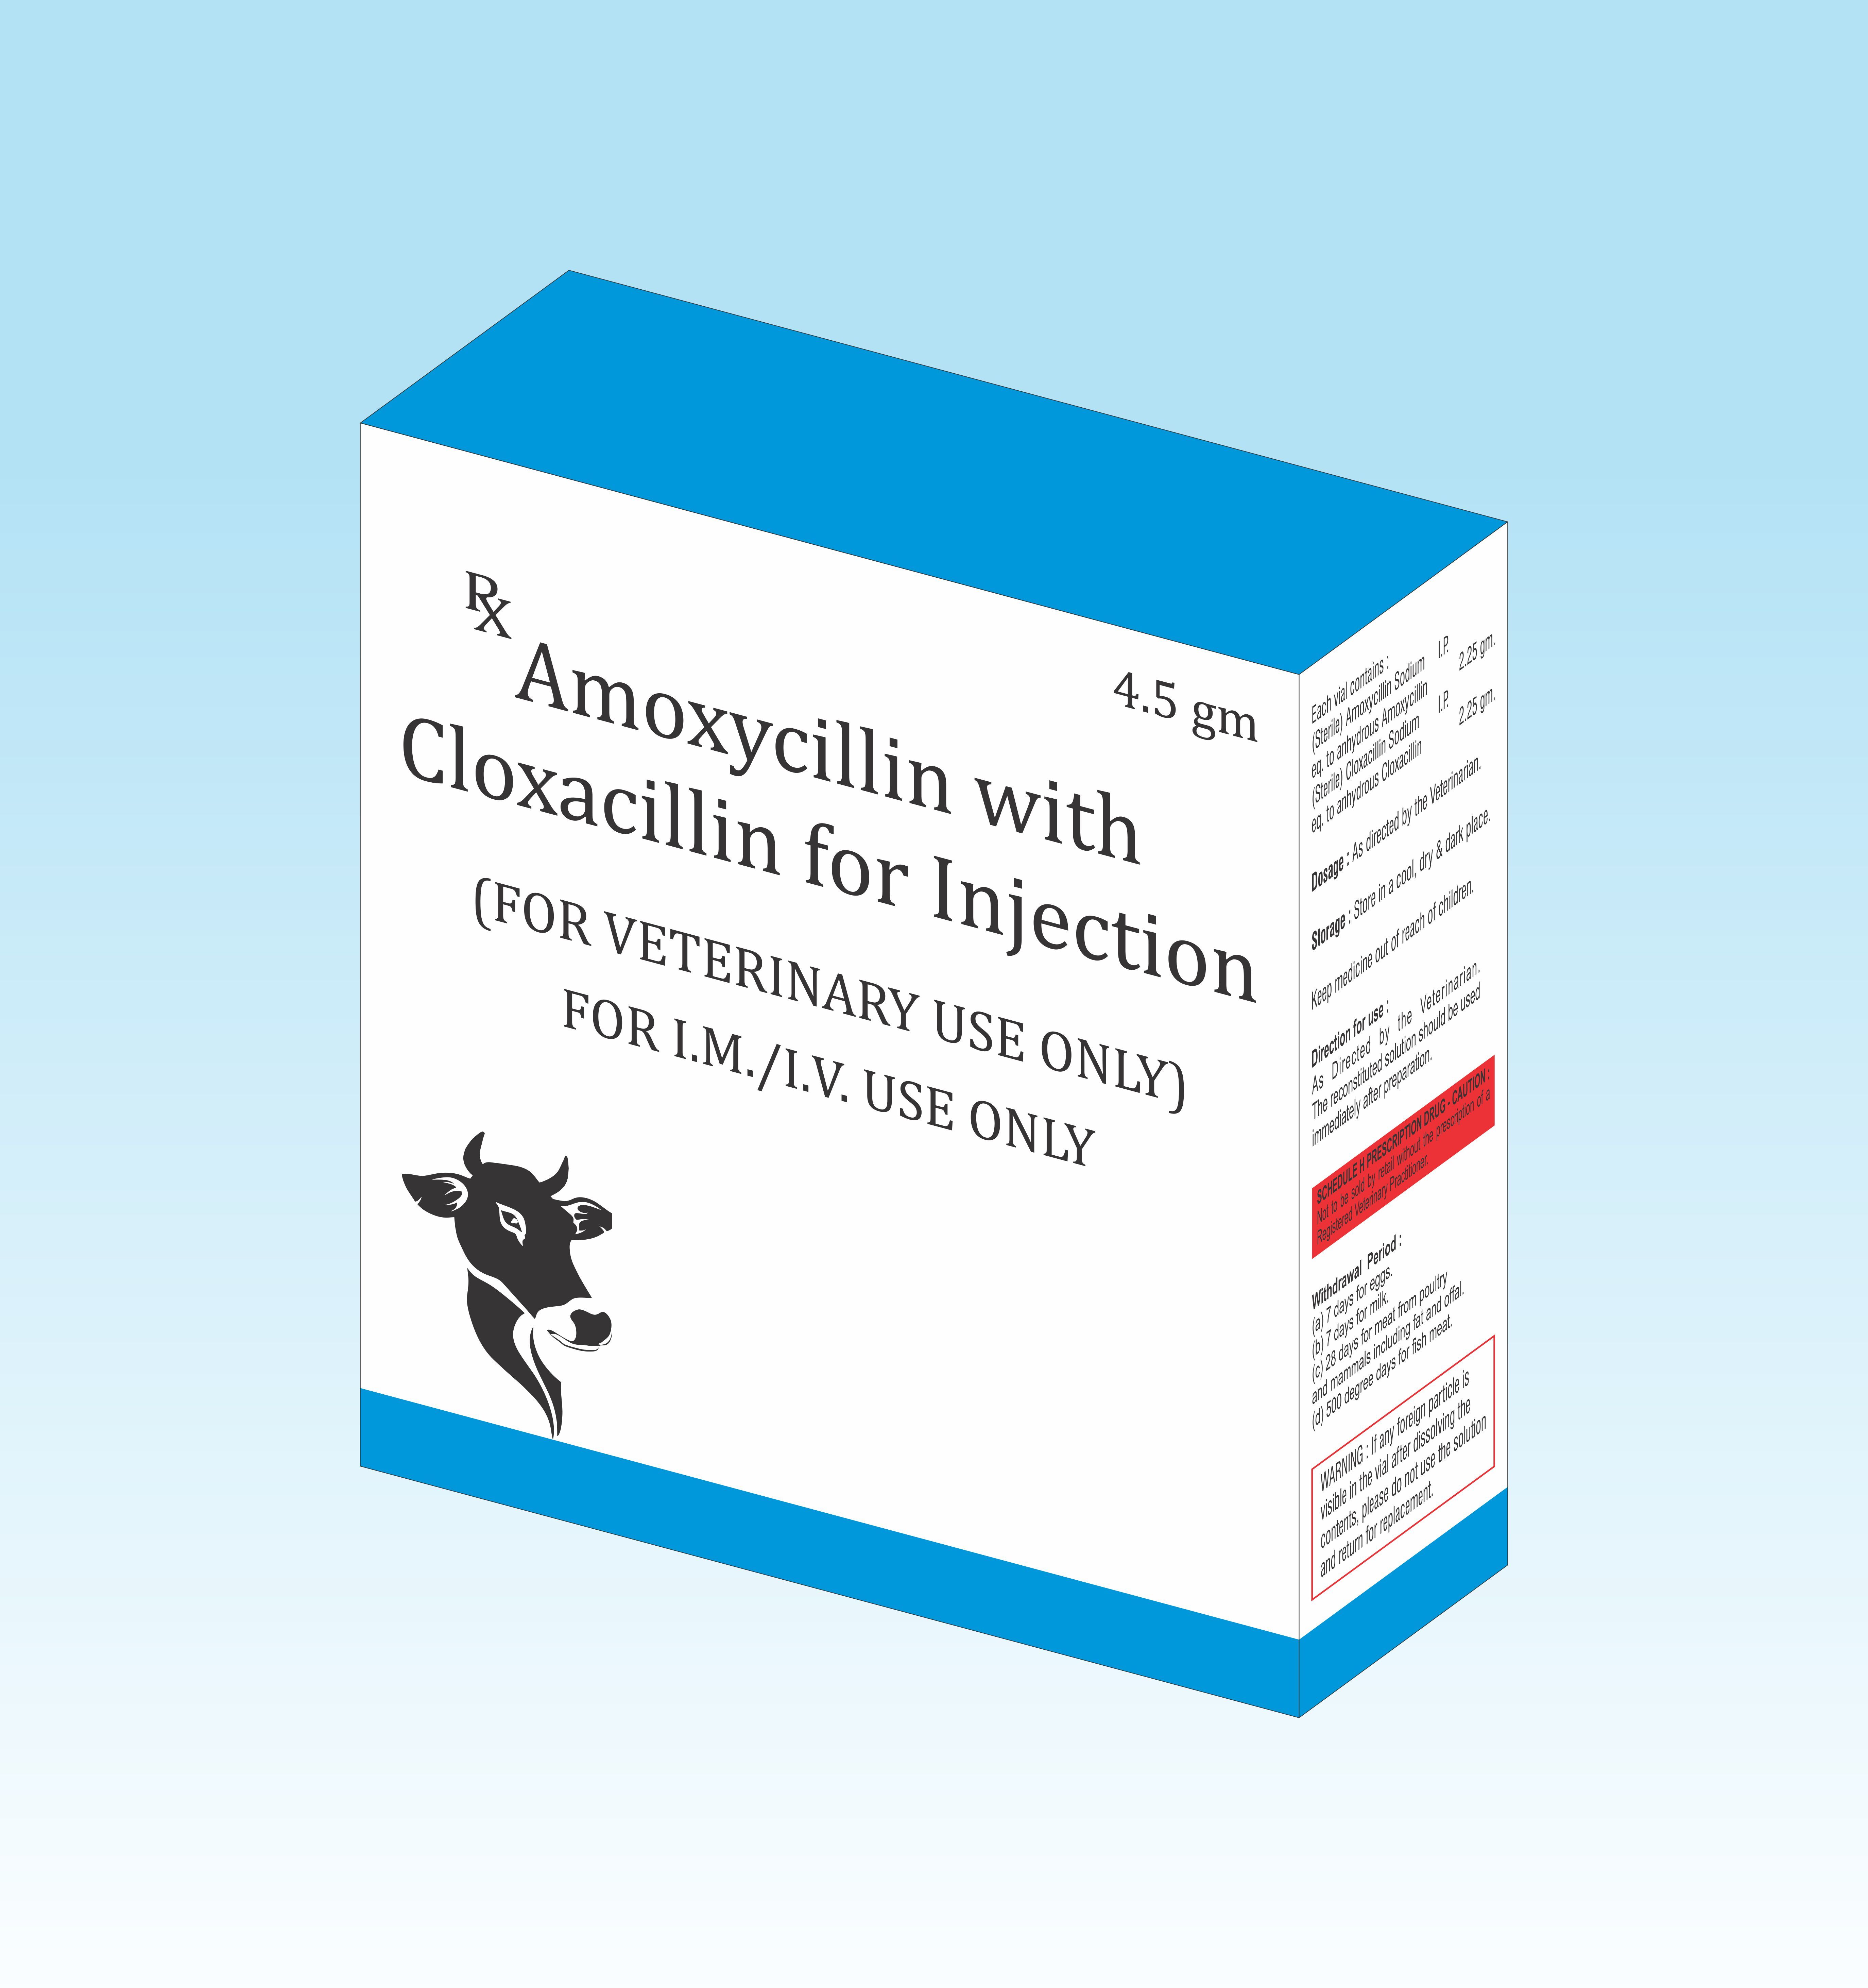 BUSERELIN ACETATE VETERINARY INJECTION THIRD PARTY MANUFACTURING